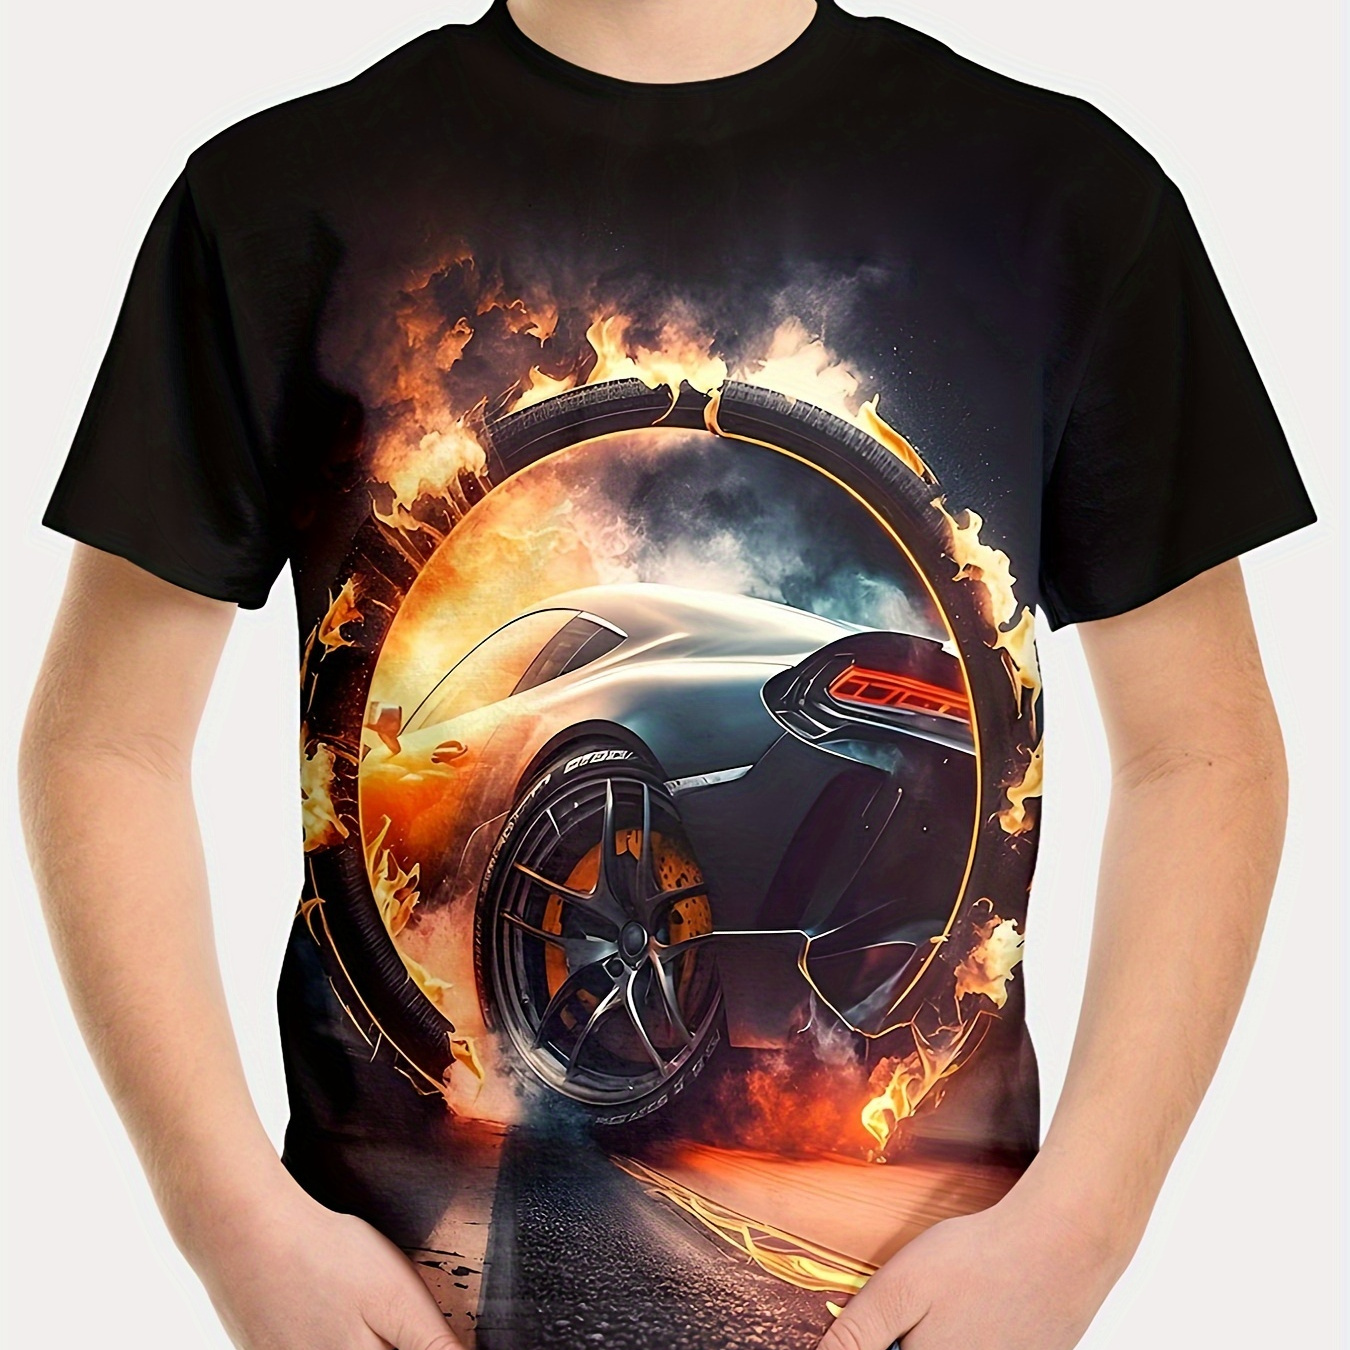 

Cool Car & Fire Ring 3d Print Boy's Casual T-shirt, Short Sleeve Comfy Tee Tops, Summer Outdoor Sports Clothing